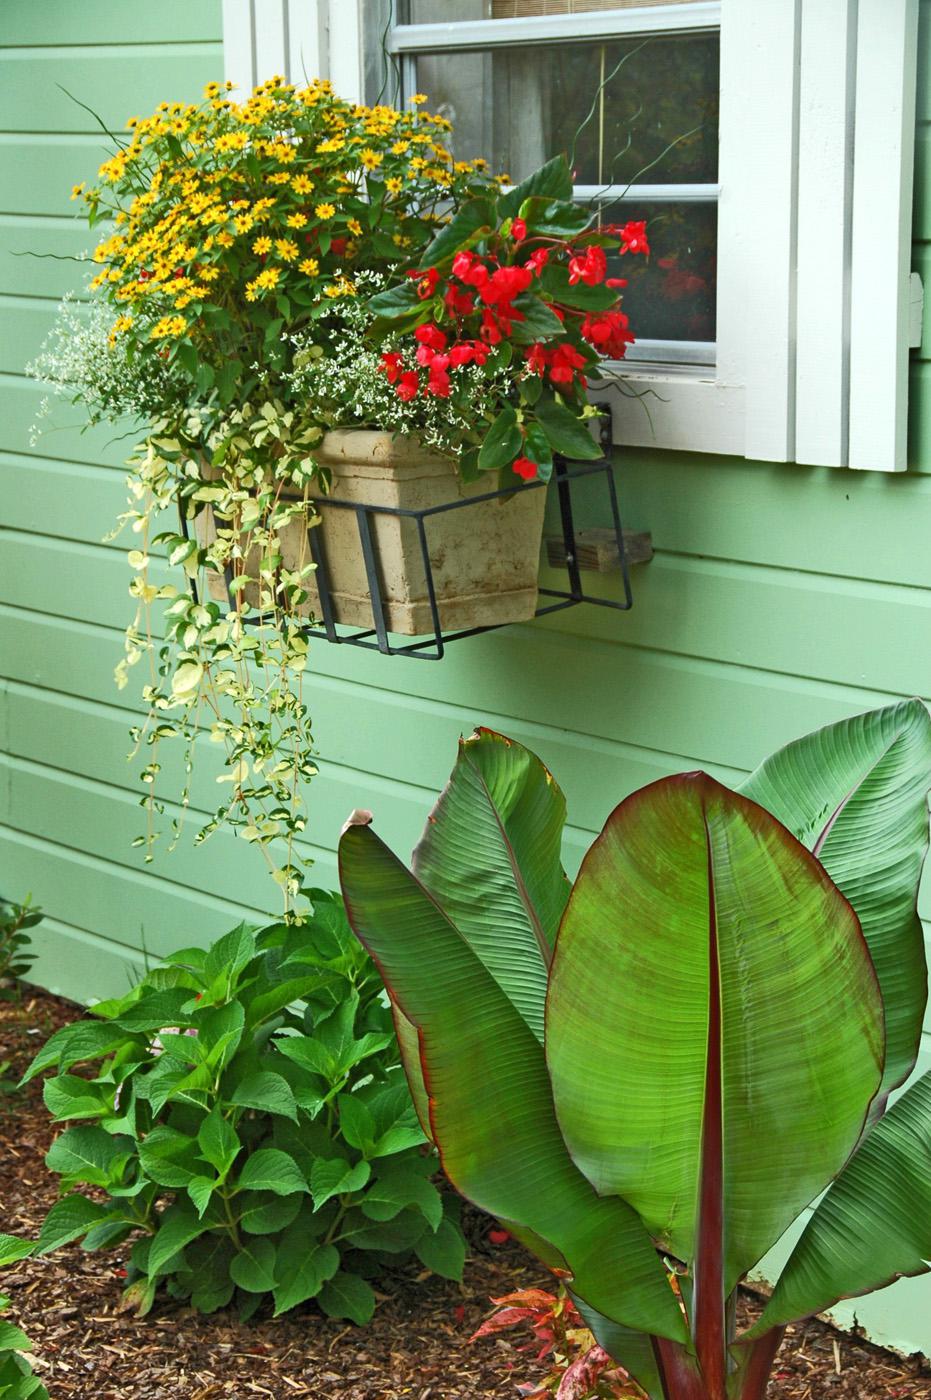 Window-box plantings can attract eyes above traditional landscape beds. Just like ground level planting, take time to prepare the soil. Select a good, lightweight potting mix.